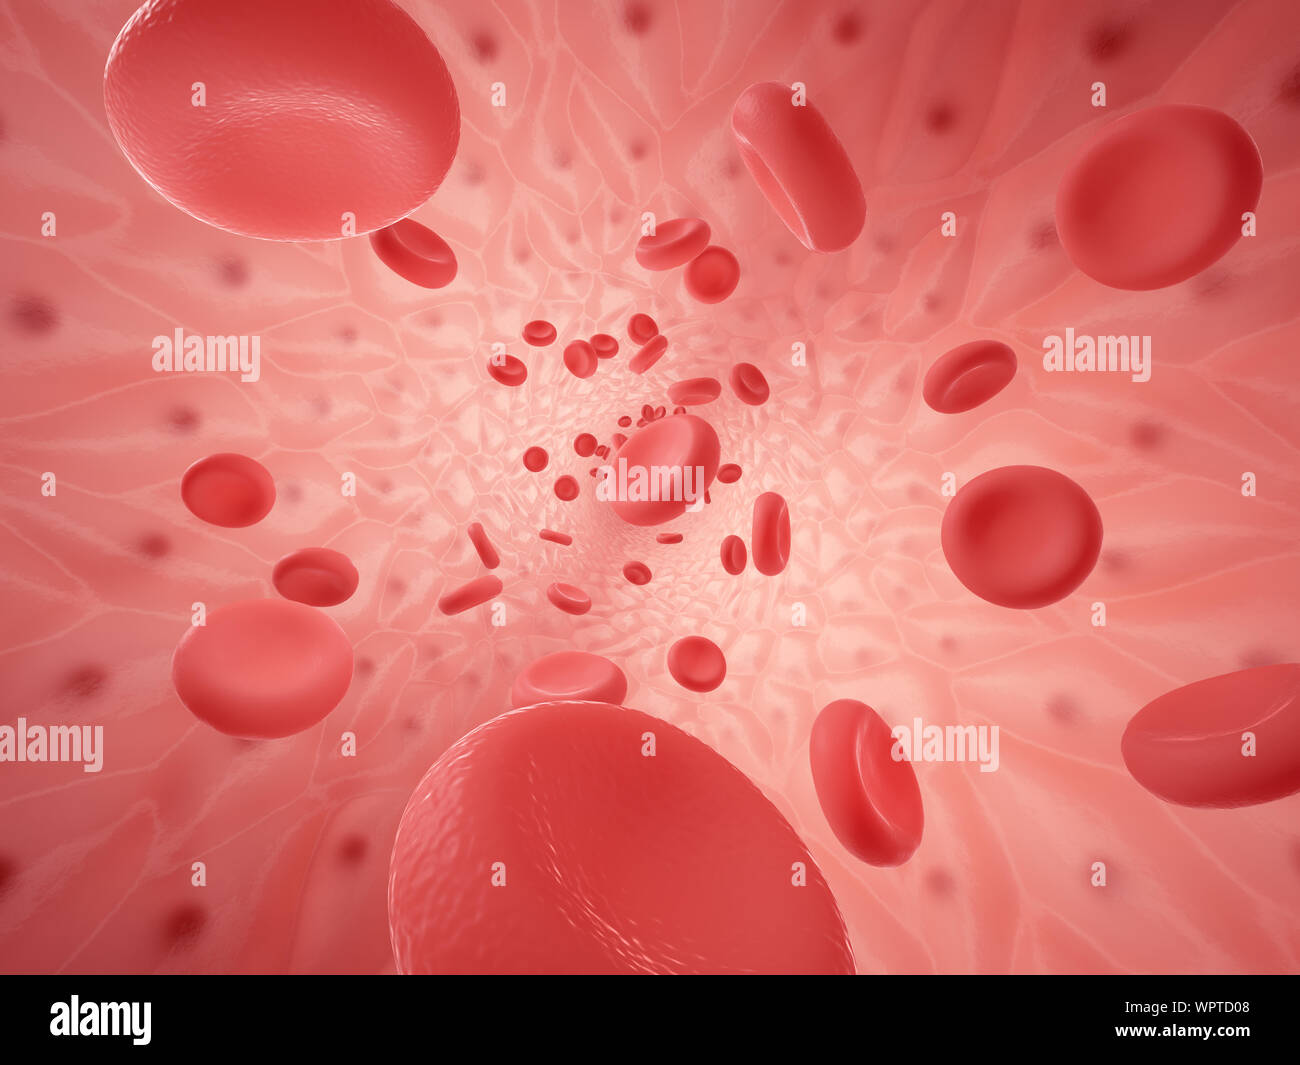 Inside space of empty healthy human anatomical vessel with red blood cells - erythrocytes and endothelium cells, 3d rendering Stock Photo